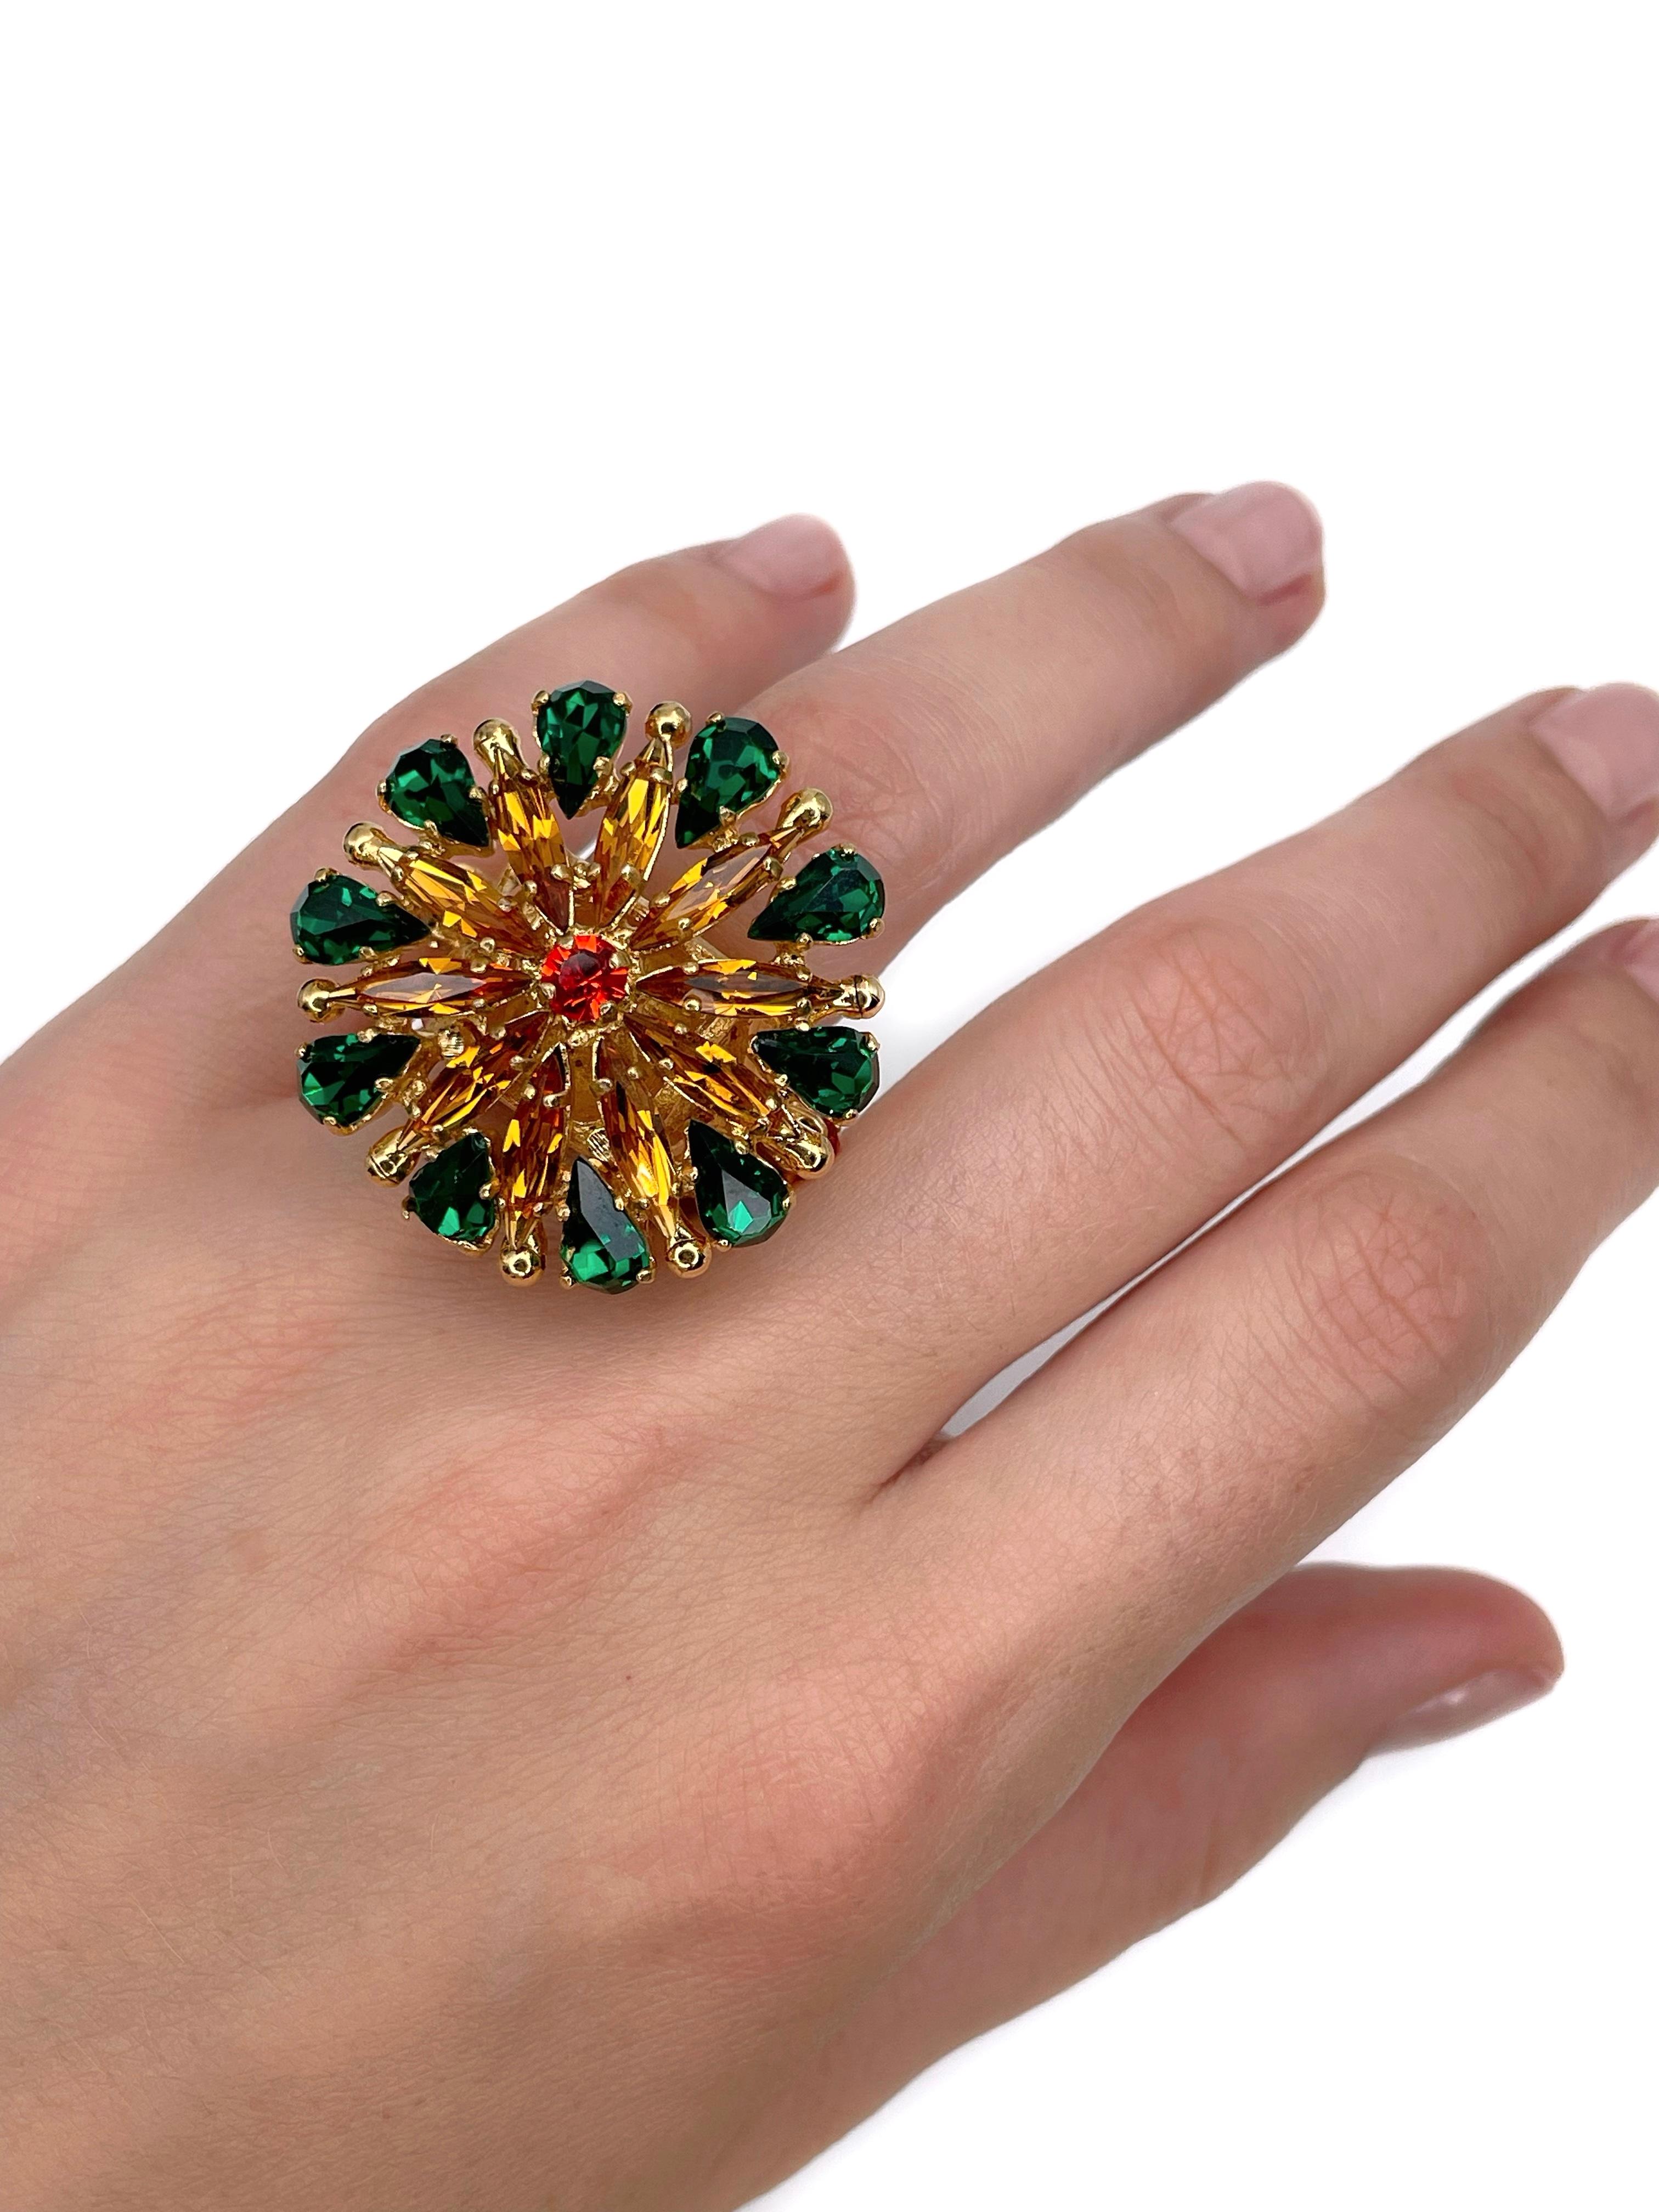 This is an amazing vintage floral cocktail ring designed by YSL in 1980s. The piece is crafted in gold tone metal. It features green and orange shiny crystals. 

Signed: “Yves Saint Laurent” (shown in photos).

Size: 16.5 (US 6)
Head diameter: